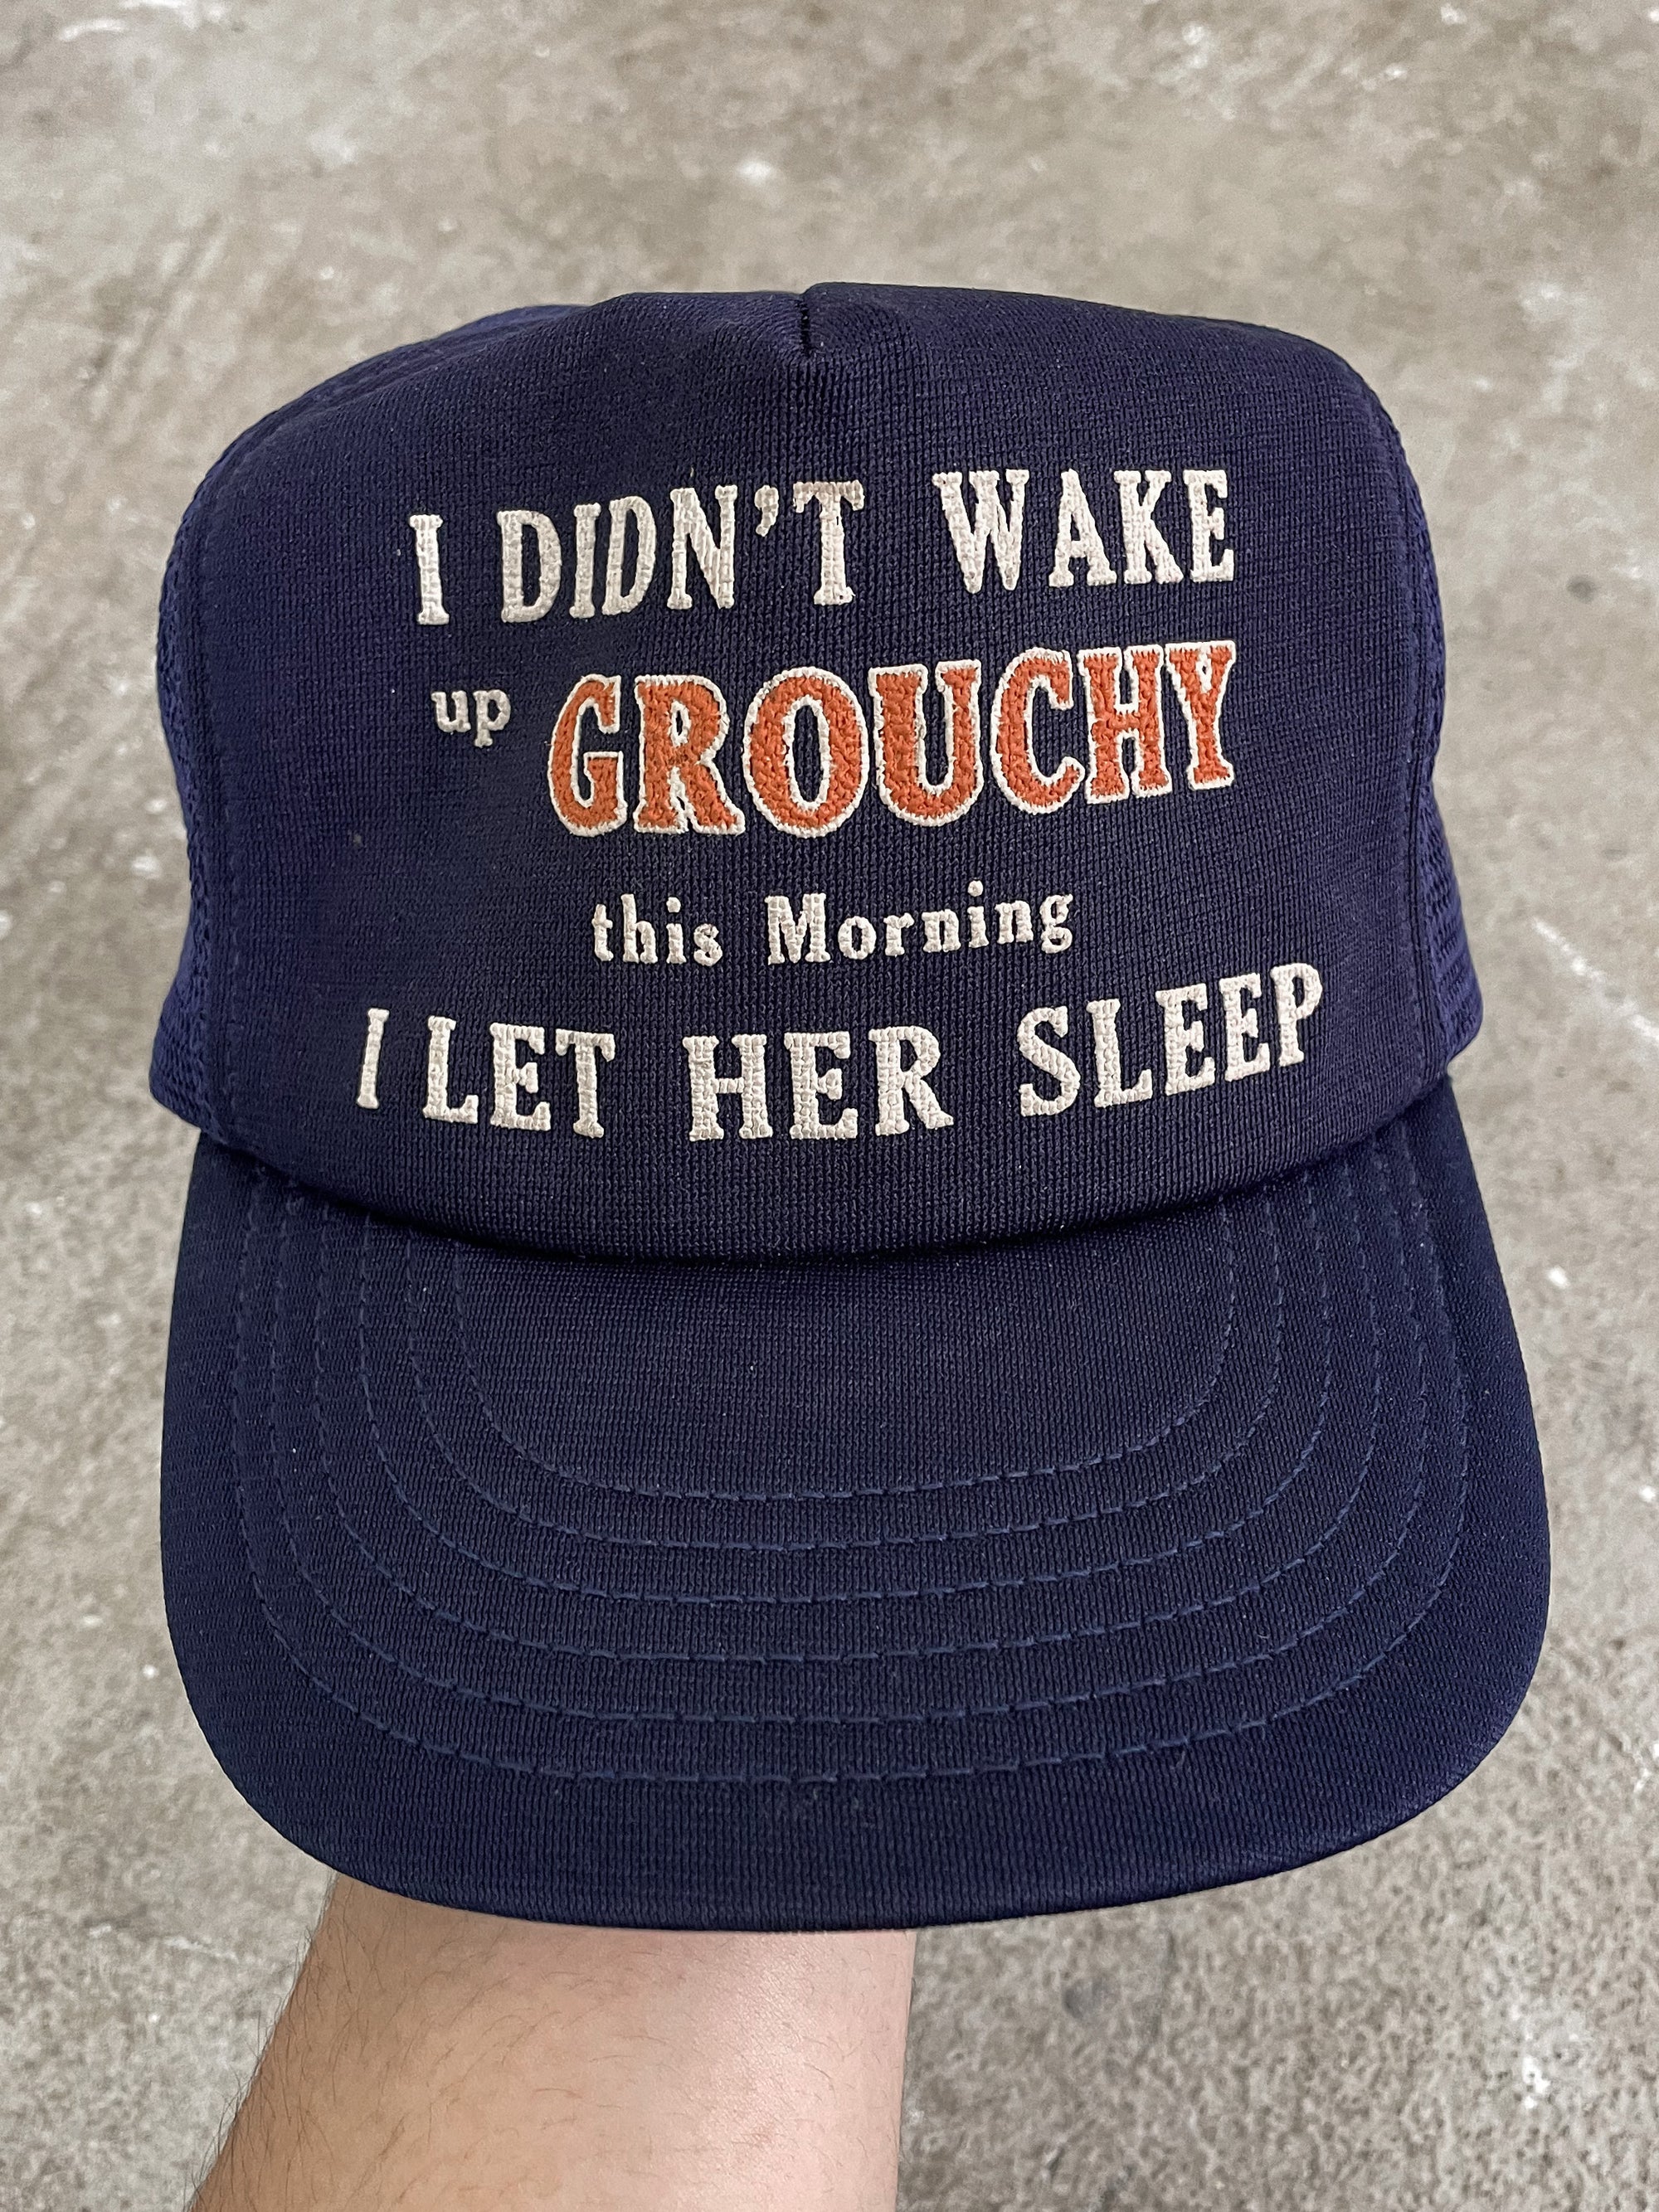 1980s “I Didn’t Wake Up Grouchy This Morning…” Trucker Hat